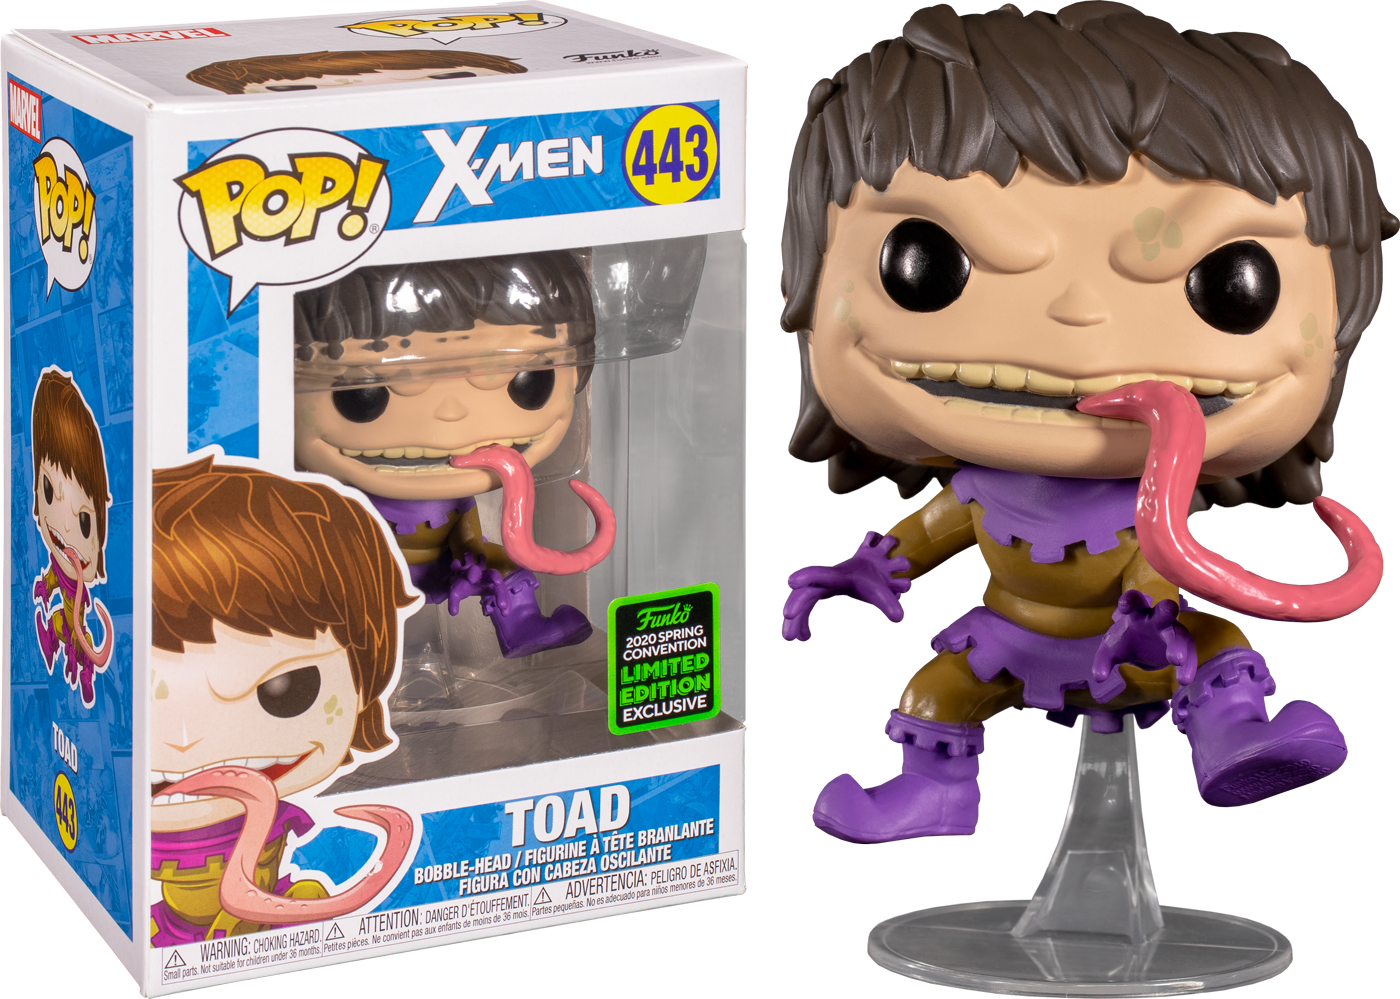 Funko Pop X Men Toad 443 Spring Convention Exclusive The Amazing Collectables